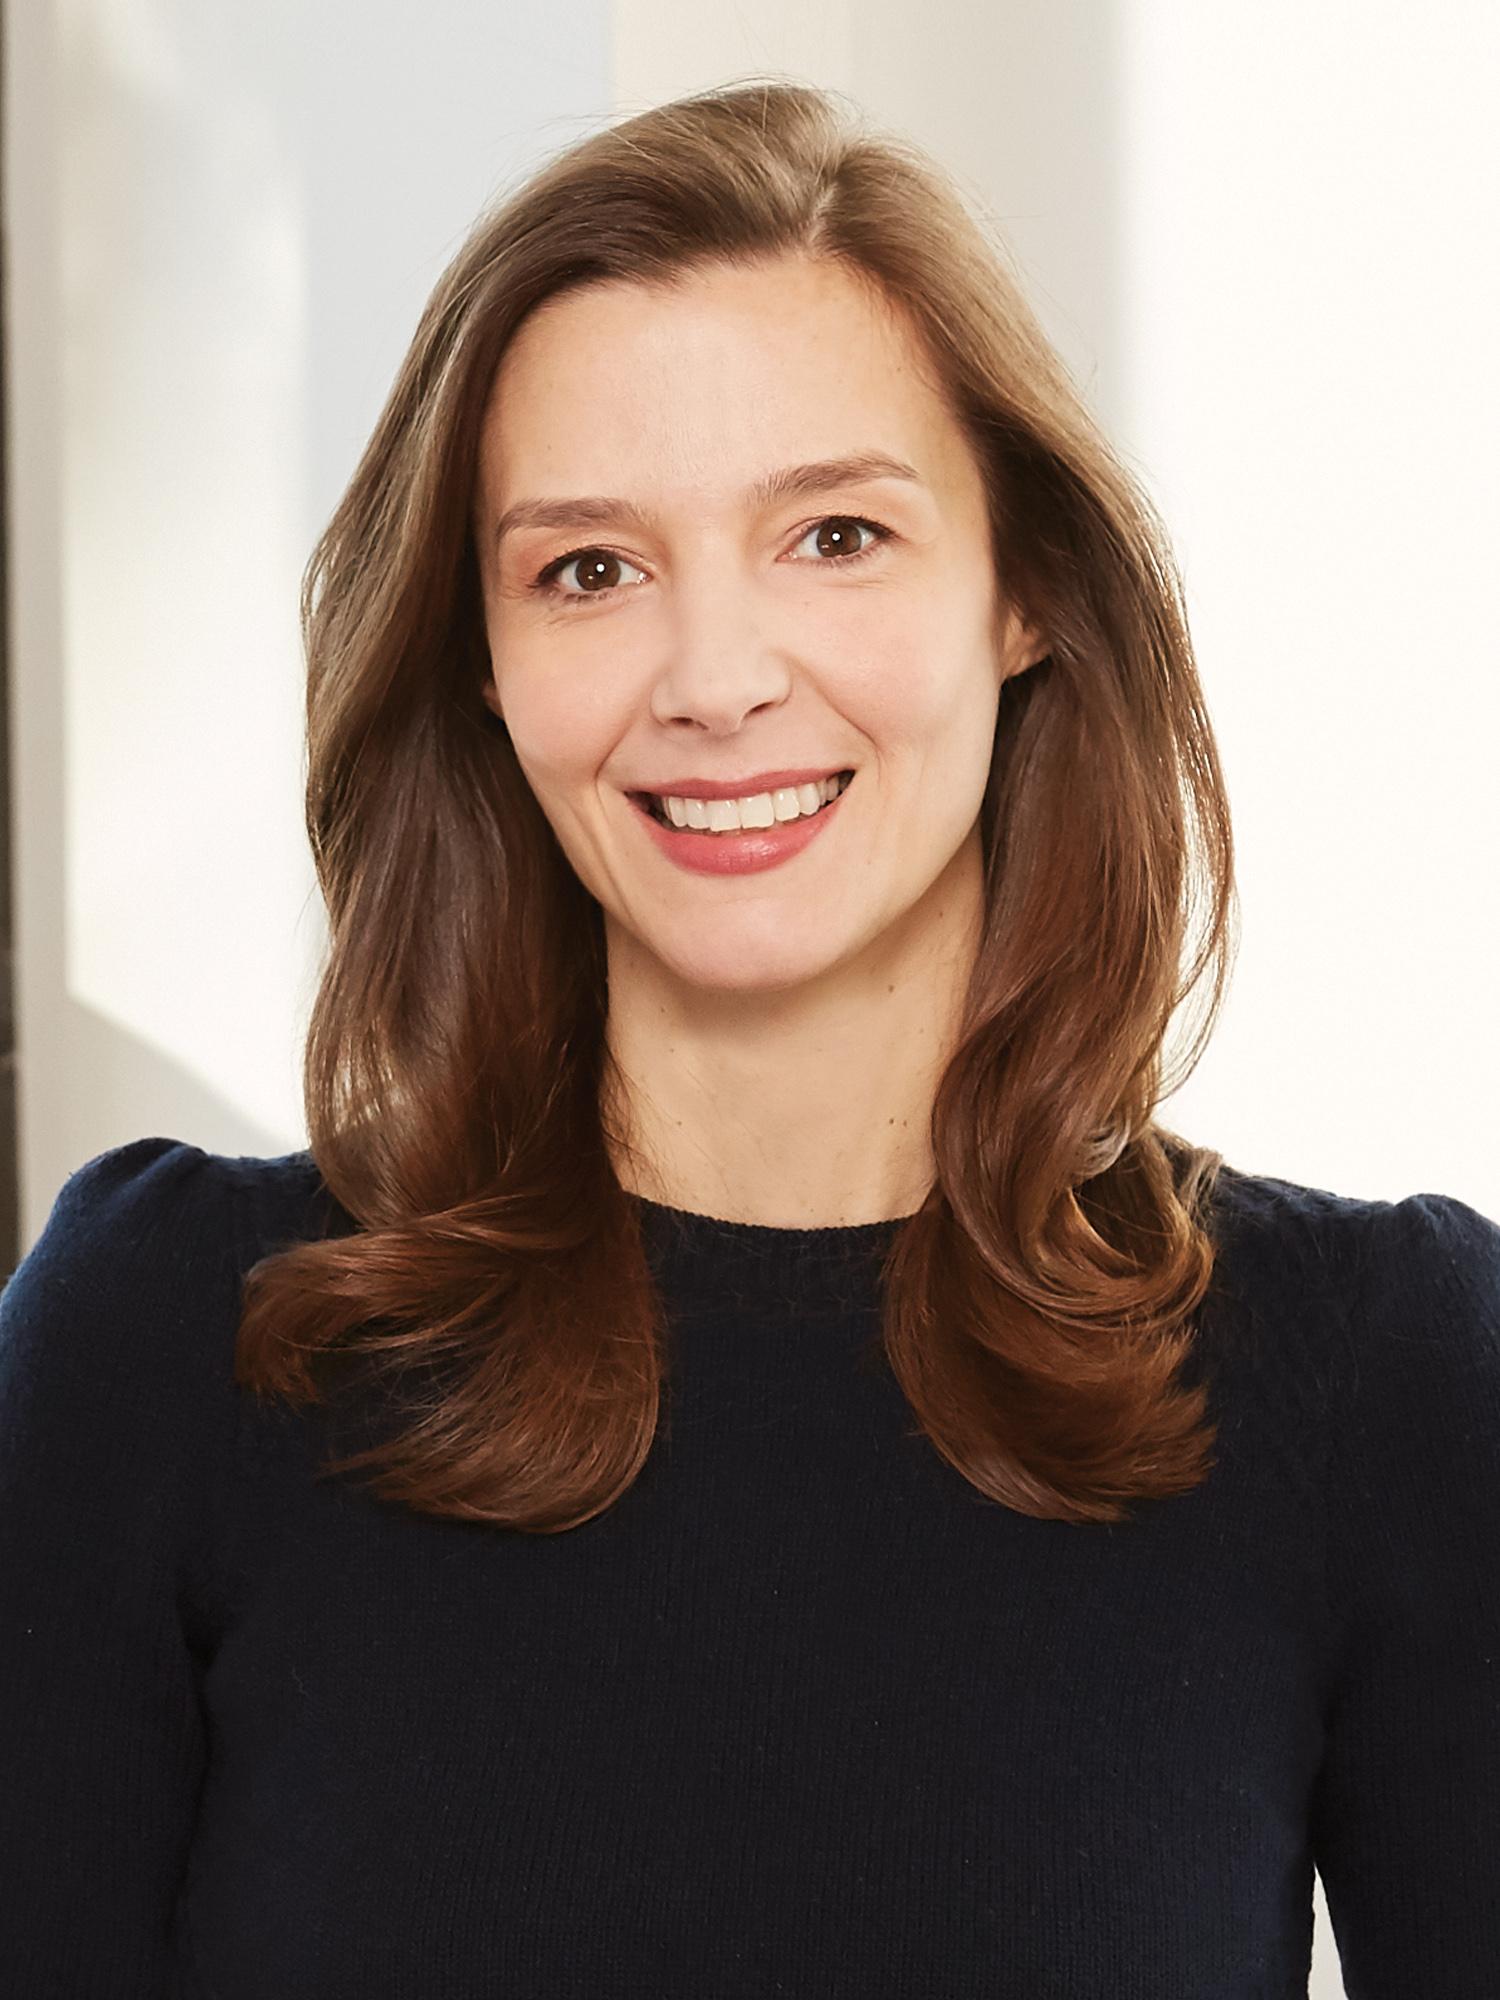 Christina Panos | Chief Marketing Officer of The Corcoran Group, a Luxury Real Estate Company